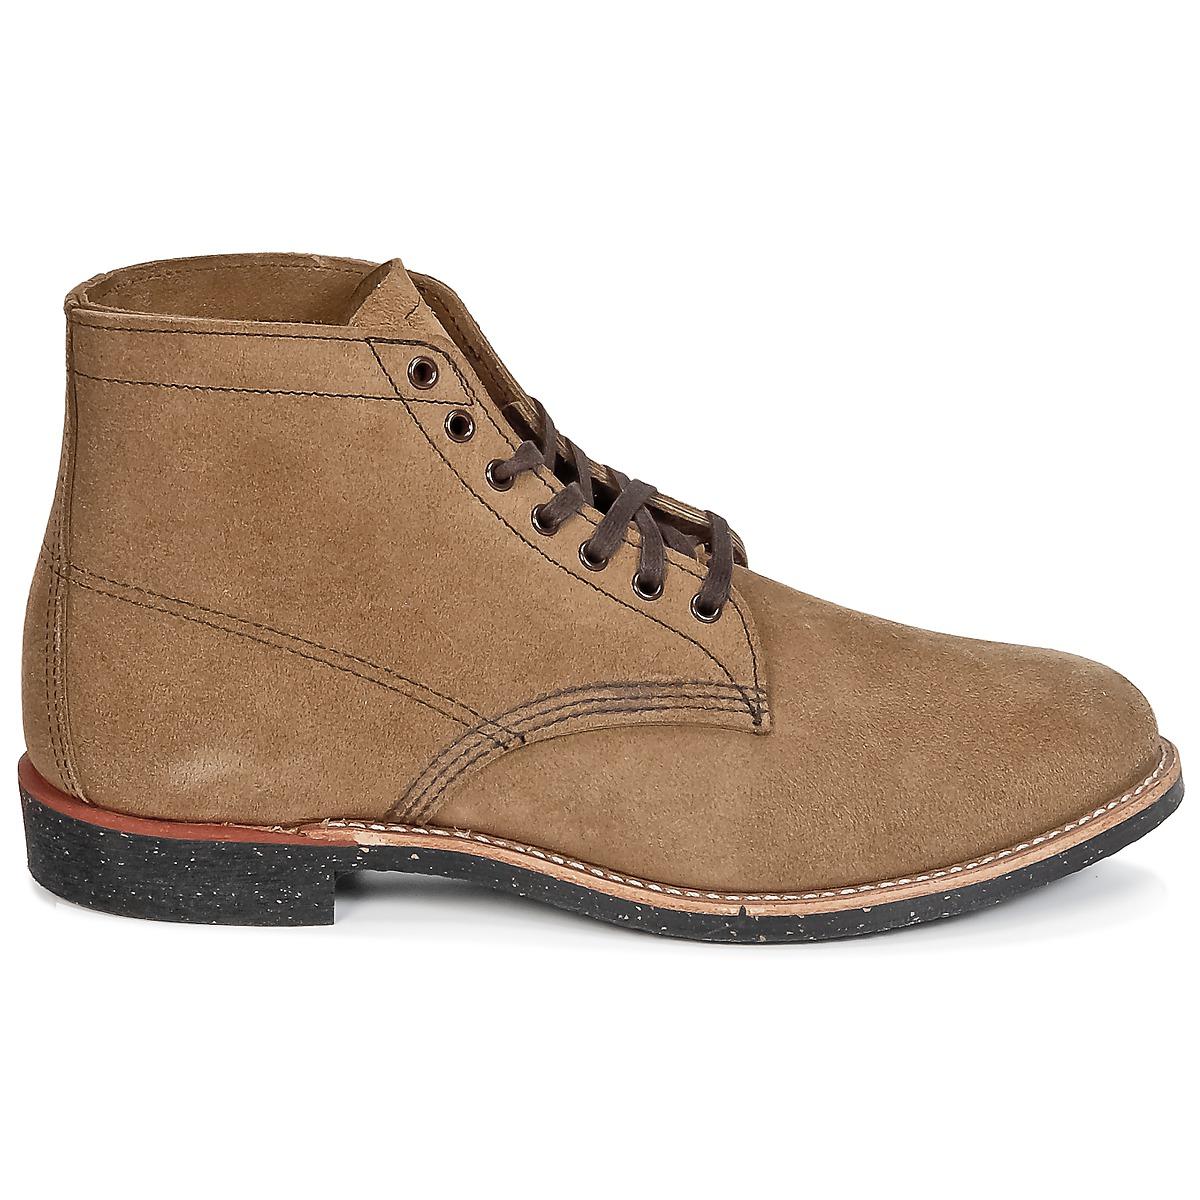 Red Wing Rubber Merchant Mid Boots in Brown for Men - Lyst